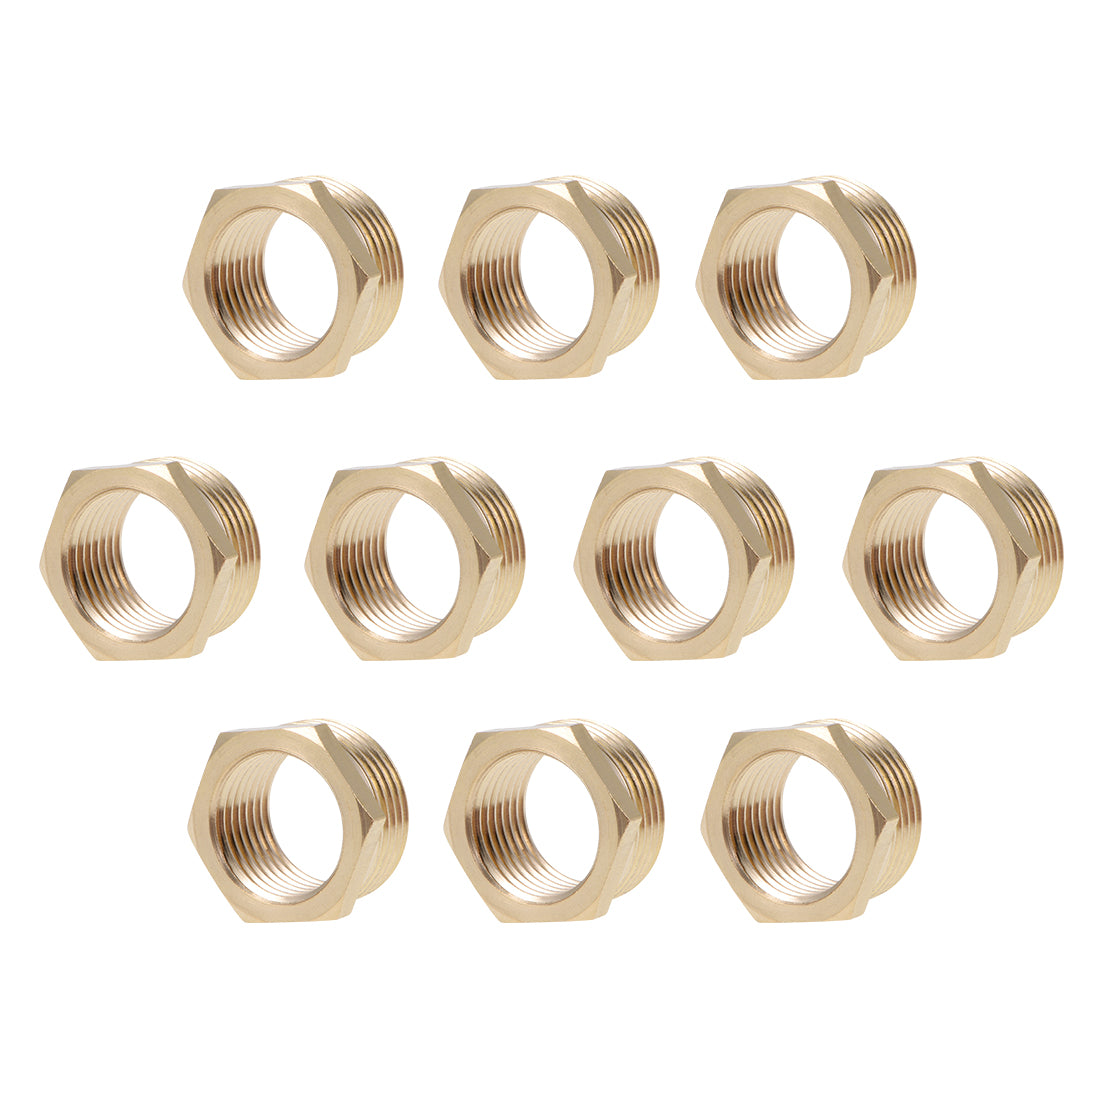 uxcell Uxcell Brass Threaded Pipe Fitting G3/4 Male x G1/2 Female Hex Bushing Adapter 10pcs